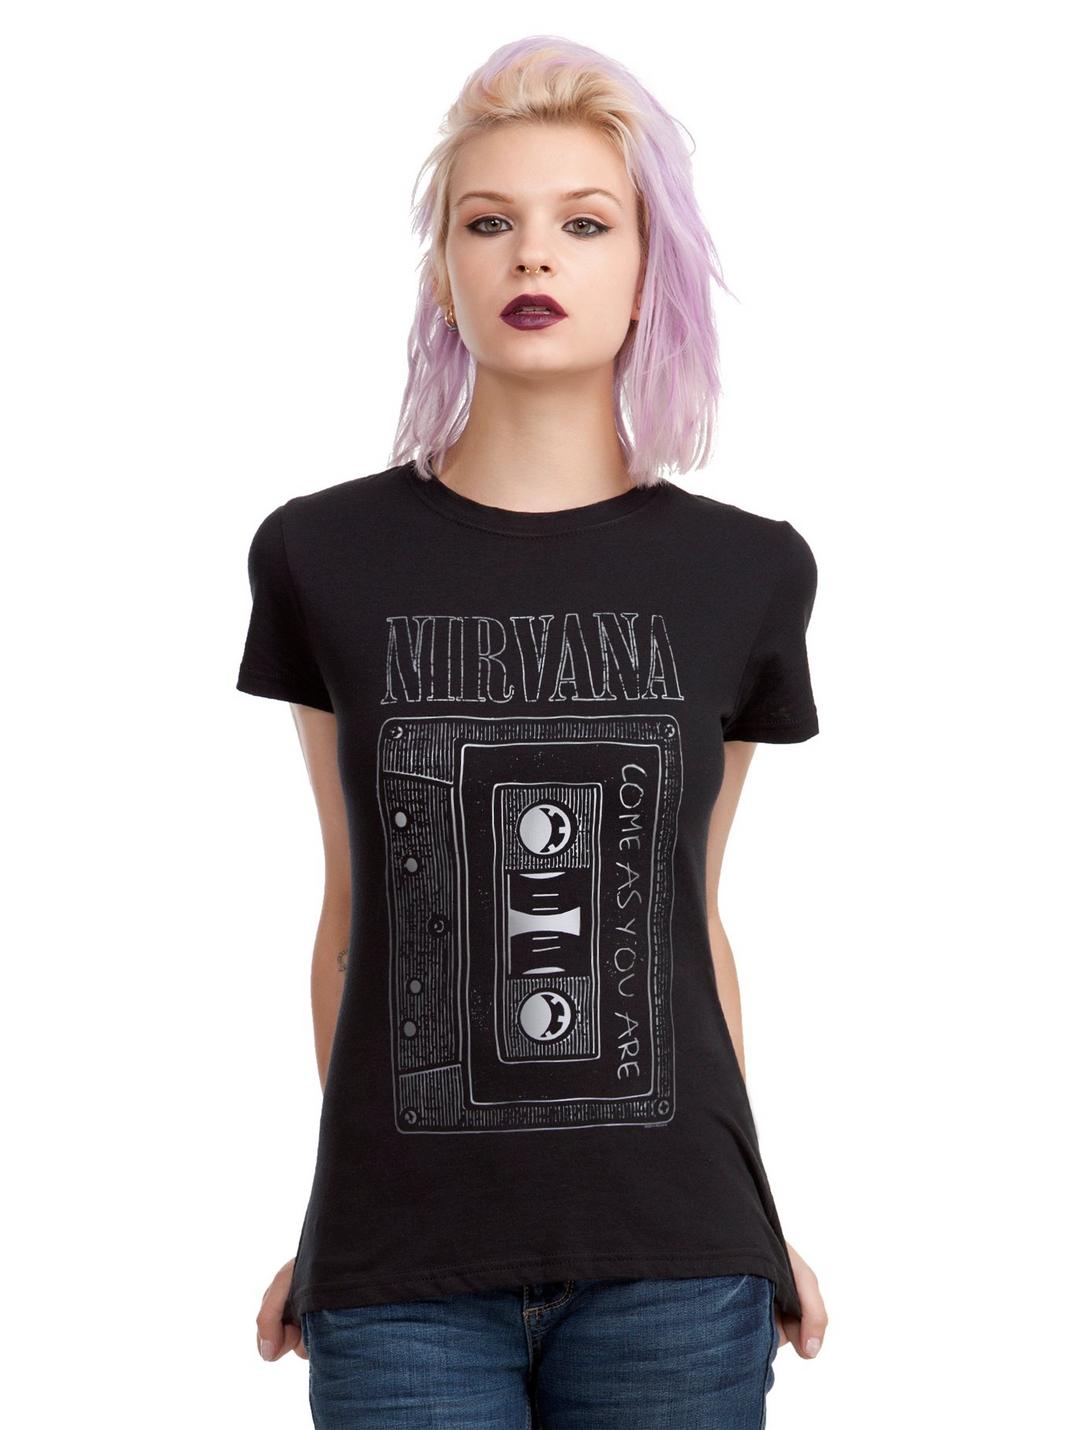 Nirvana Come As You Are Cassette Girls T-Shirt, , hi-res